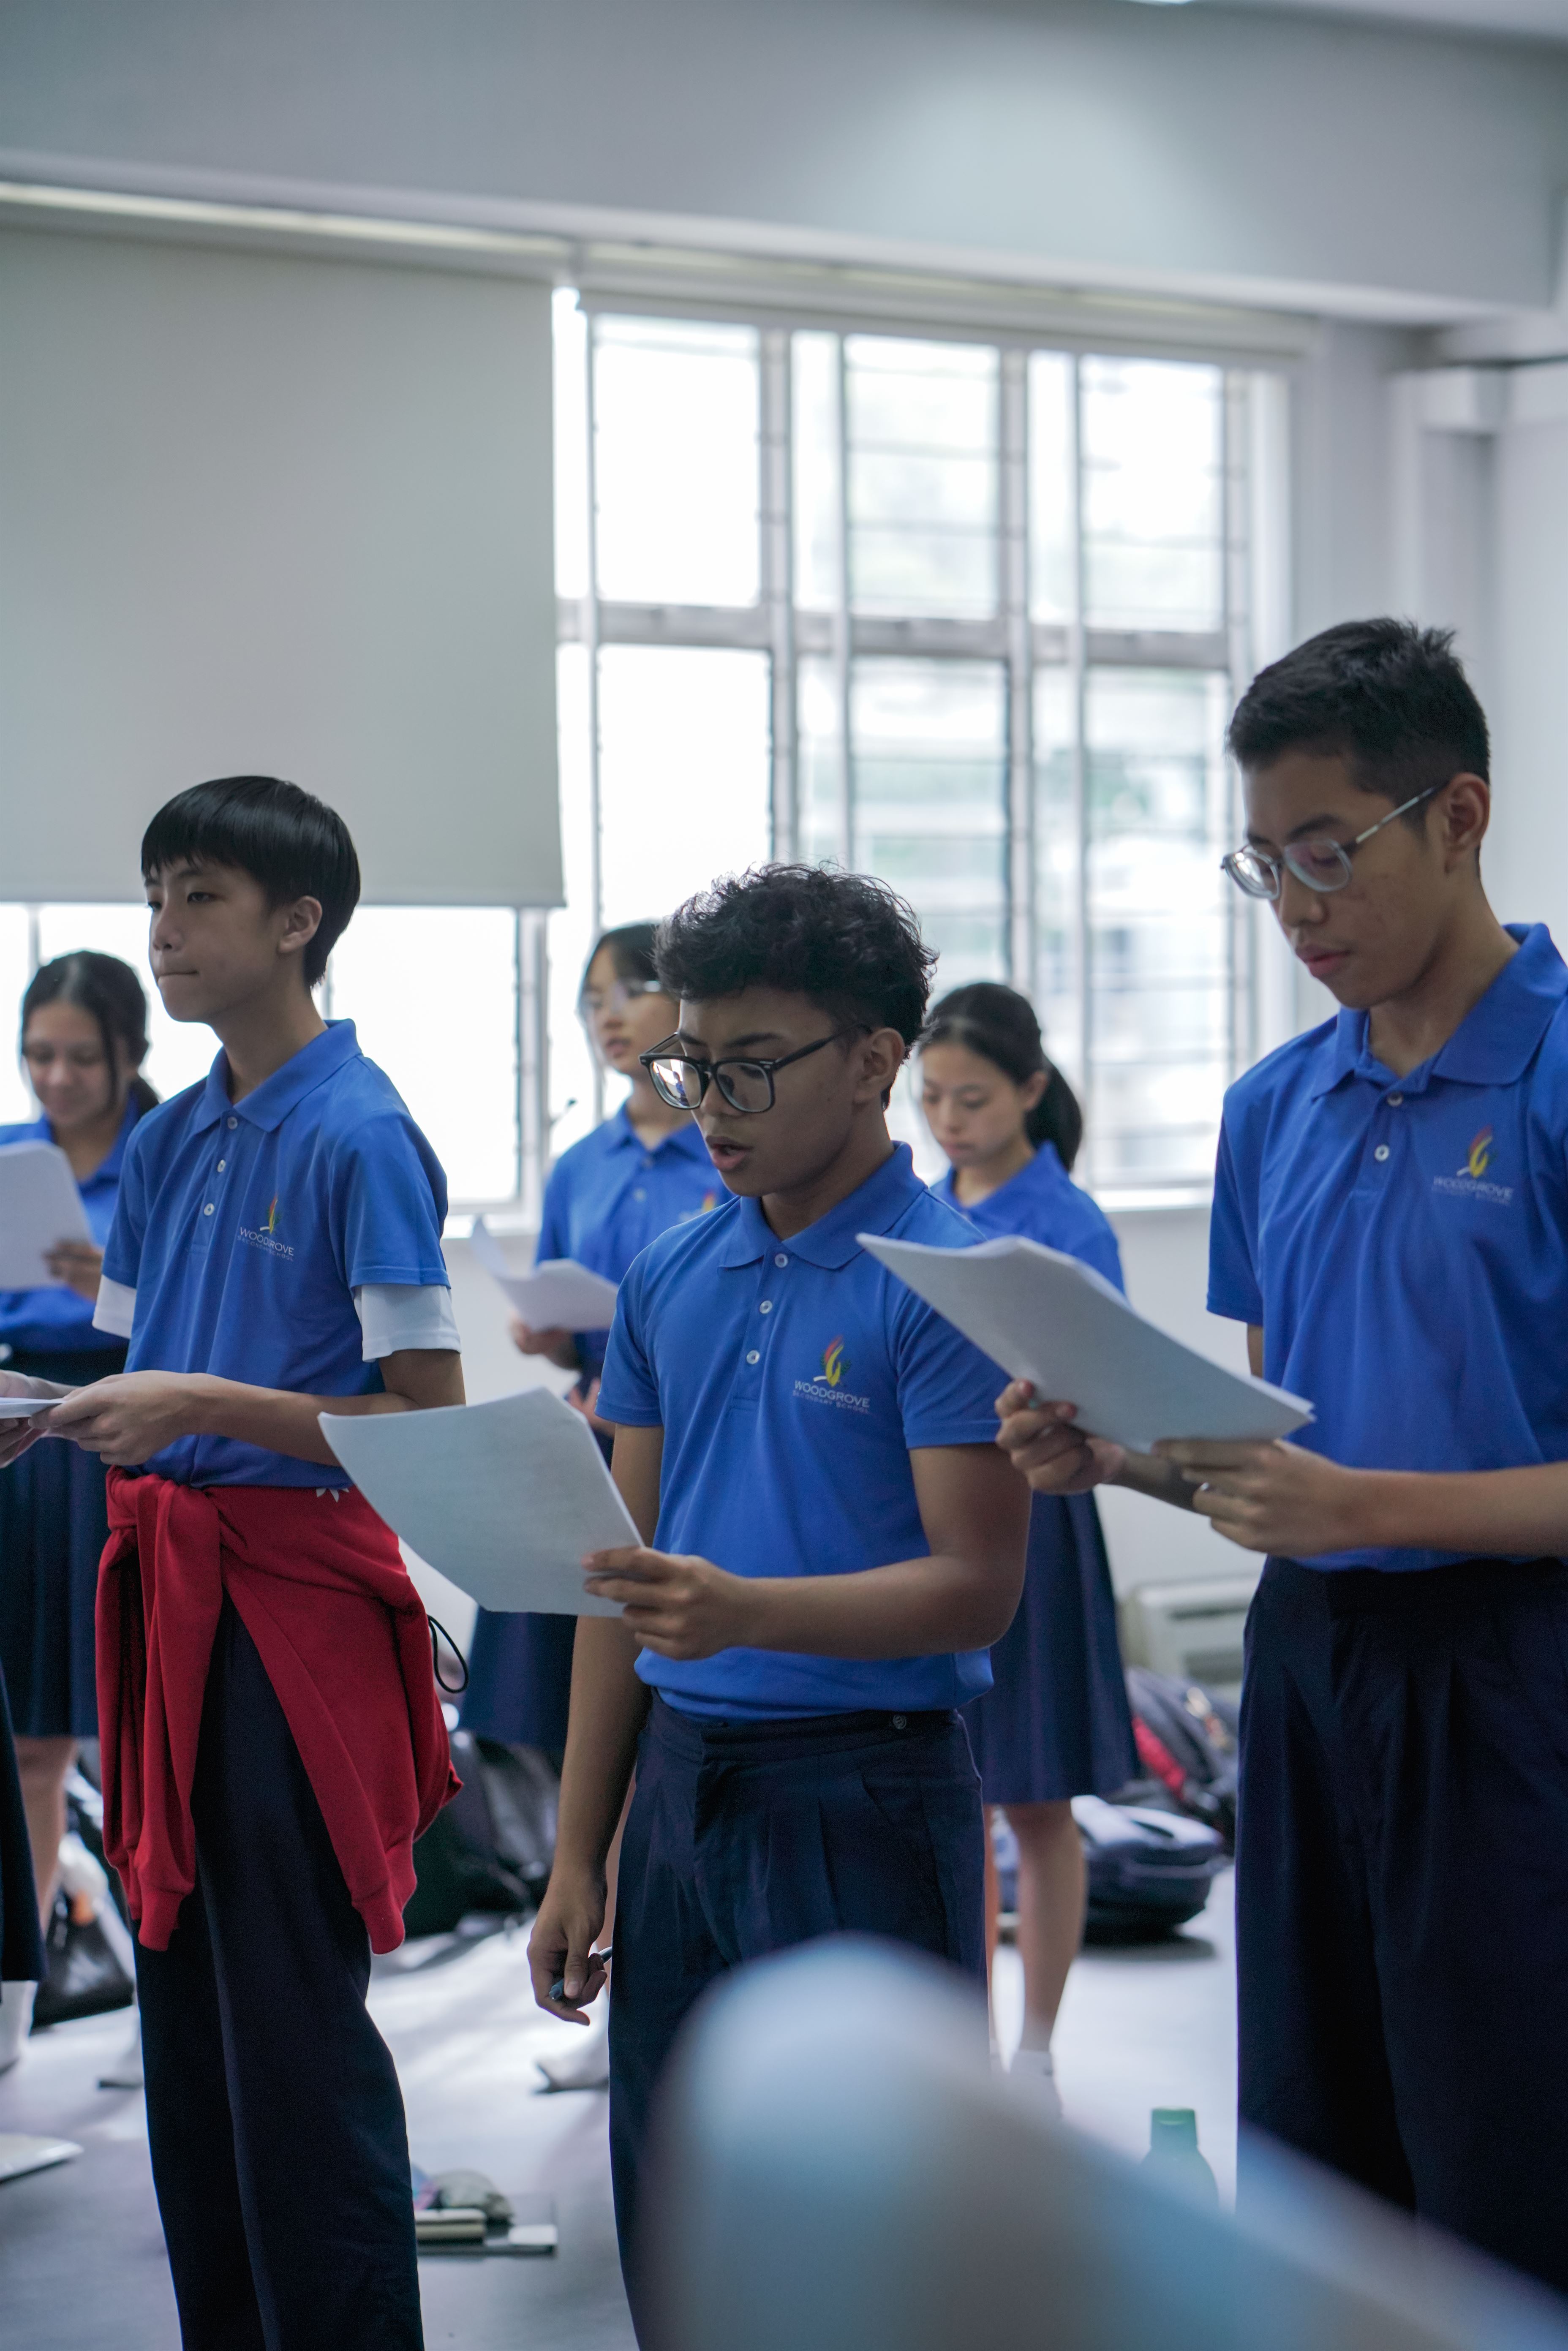 Our Choristers Working Towards Their Next Performance